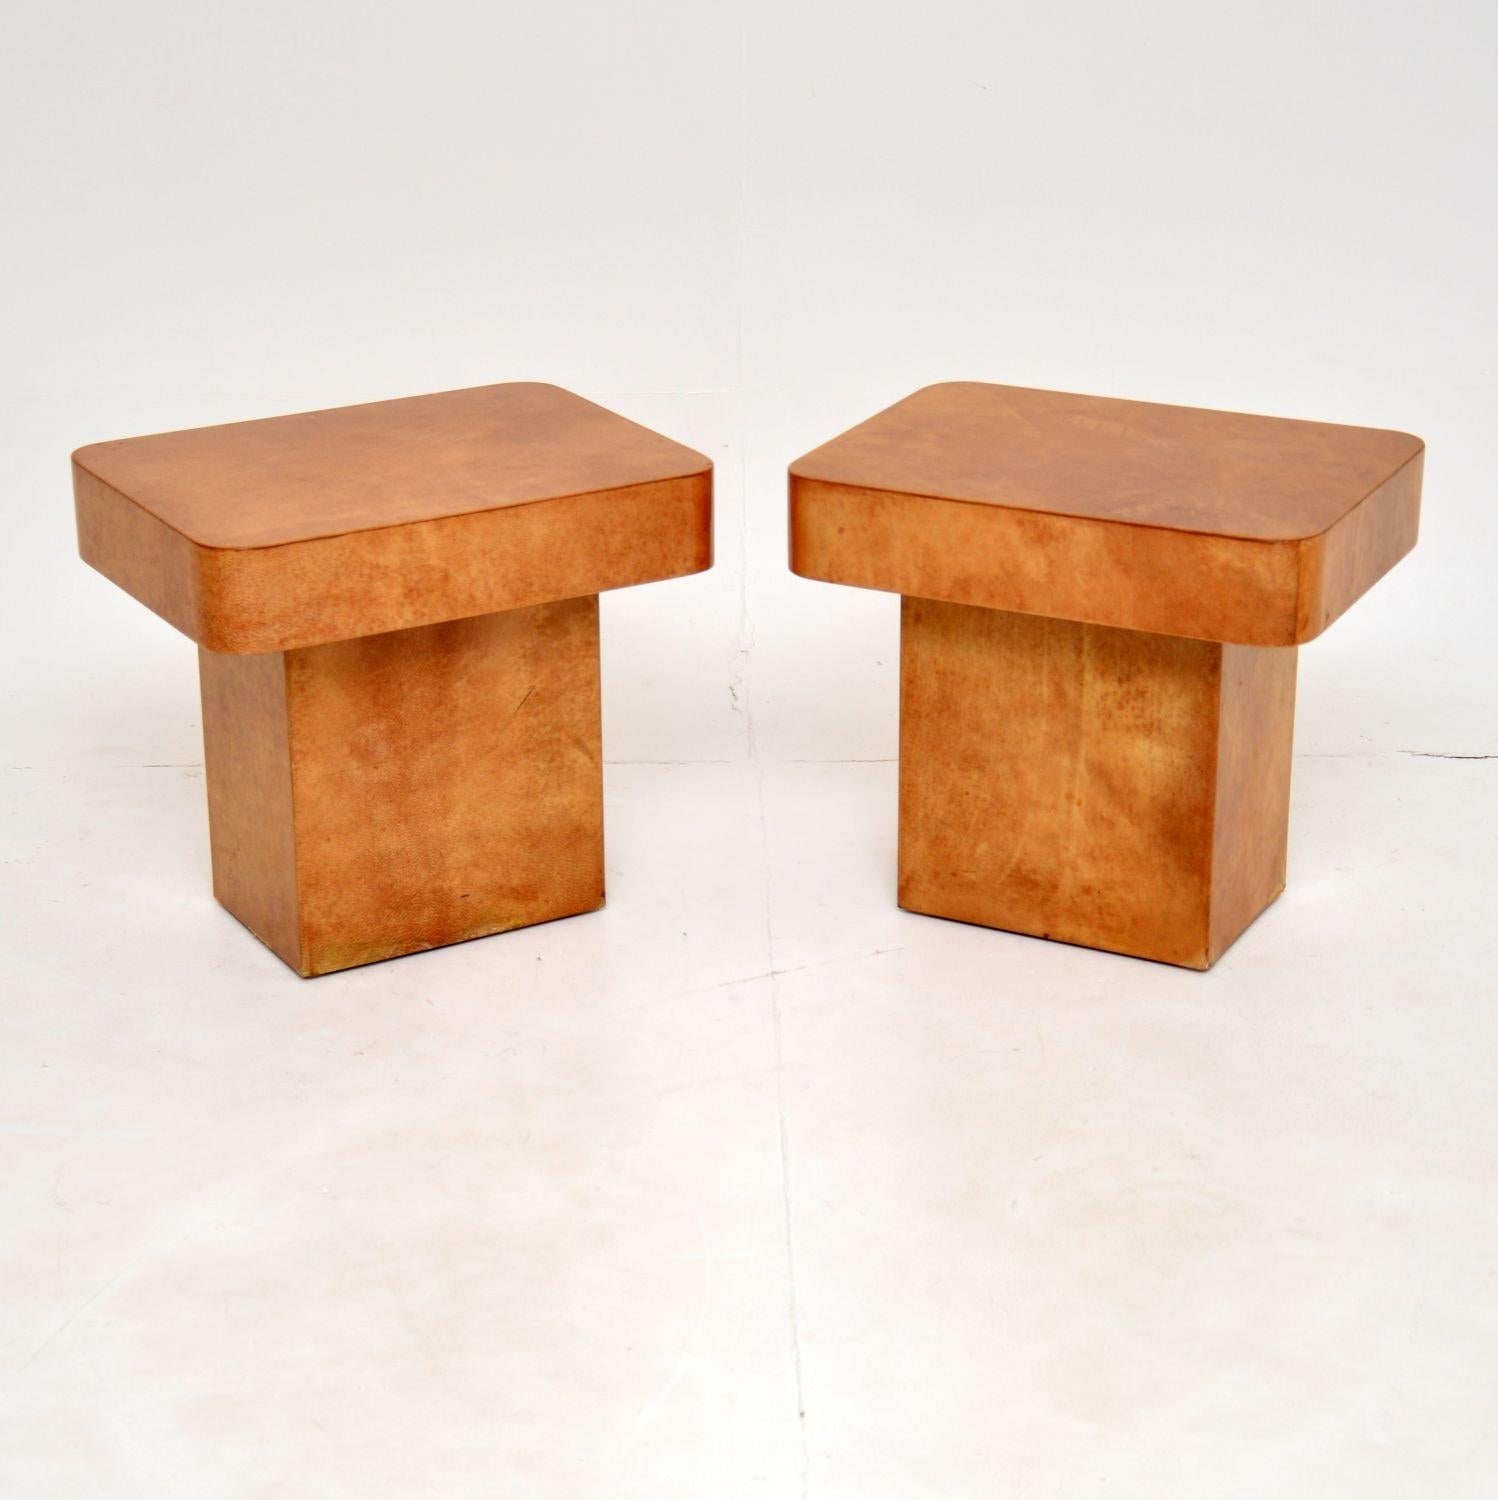 A stunning pair of vintage Italian side tables, made from lacquered goatskin parchment. These were designed by Aldo Tura, they were made in Italy around the 1970’s.

The quality is outstanding, these are a useful and petite size. They have a